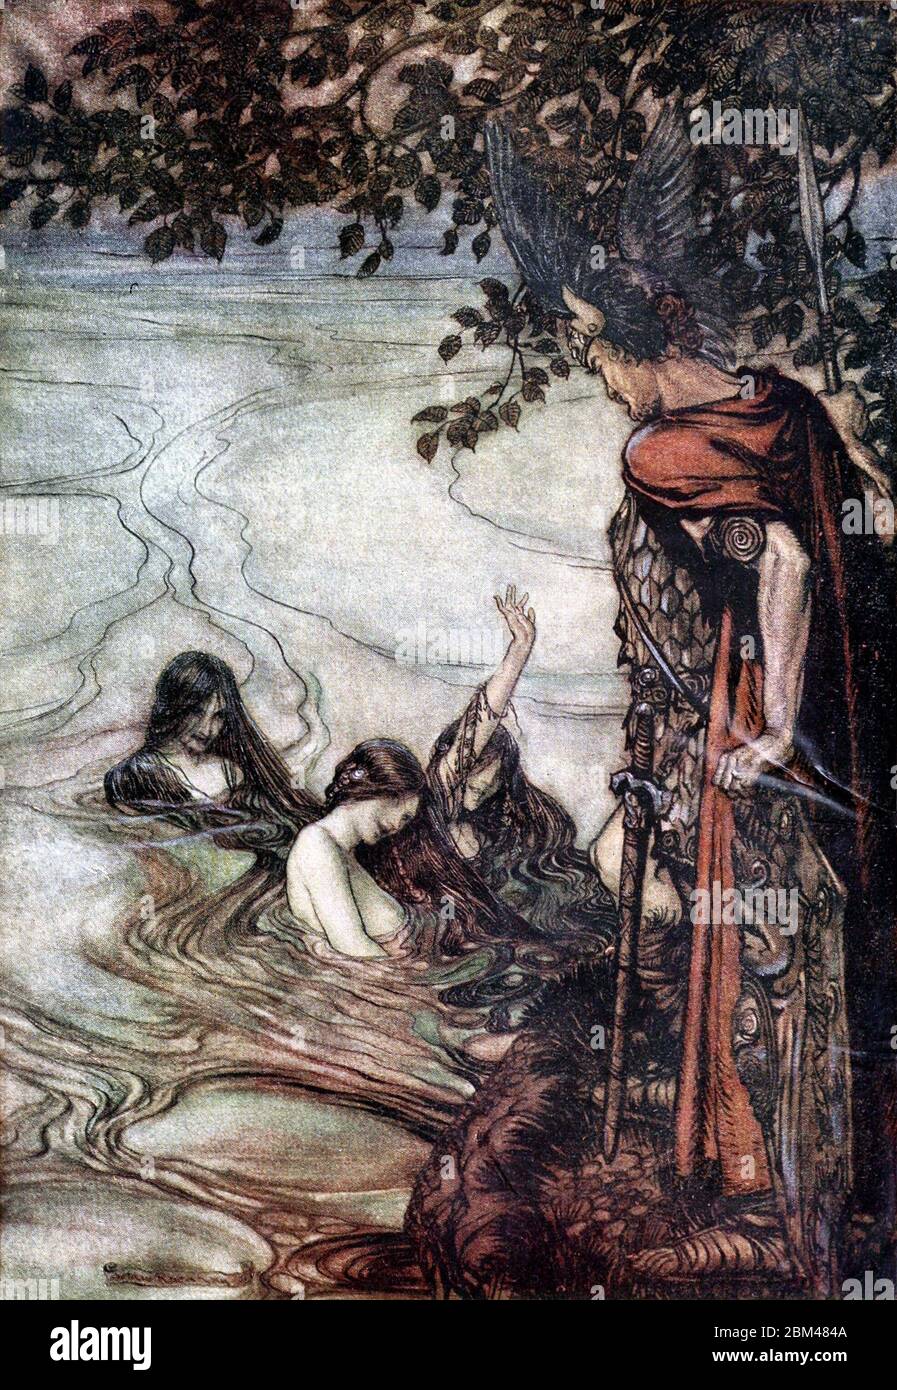 The Rhinemaidens warn Siegfried - Scene from Gotterdammerung - Twilight of the Gods (Arthur Rackham, 1912) - 'Though gaily may ye laugh, / In grief ye shall be left, / For, mocking maids; this ring / Ye ask shall never be yours.' Stock Photo